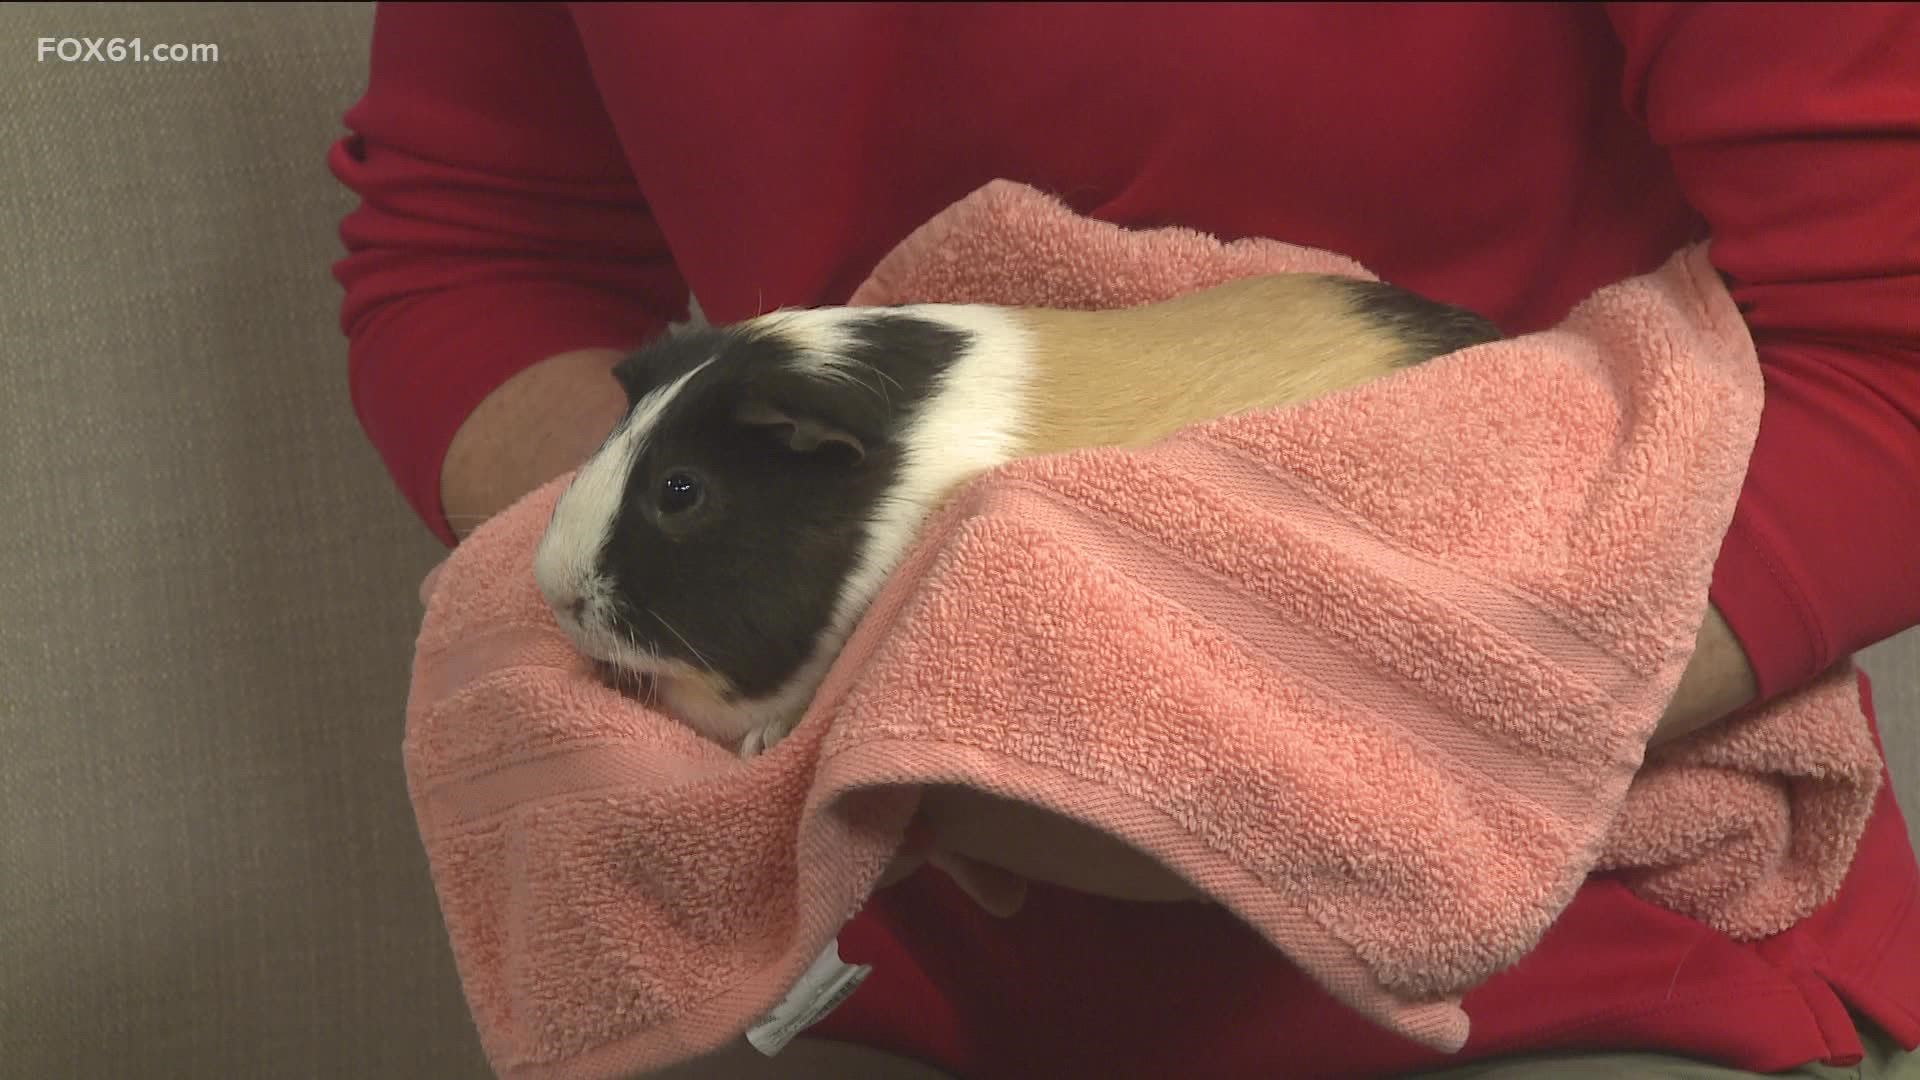 Samoa is a 2-year-old boy looking for his forever home! The Connecticut Humane Society said he is looking for a home where he's the only Guinea pig.